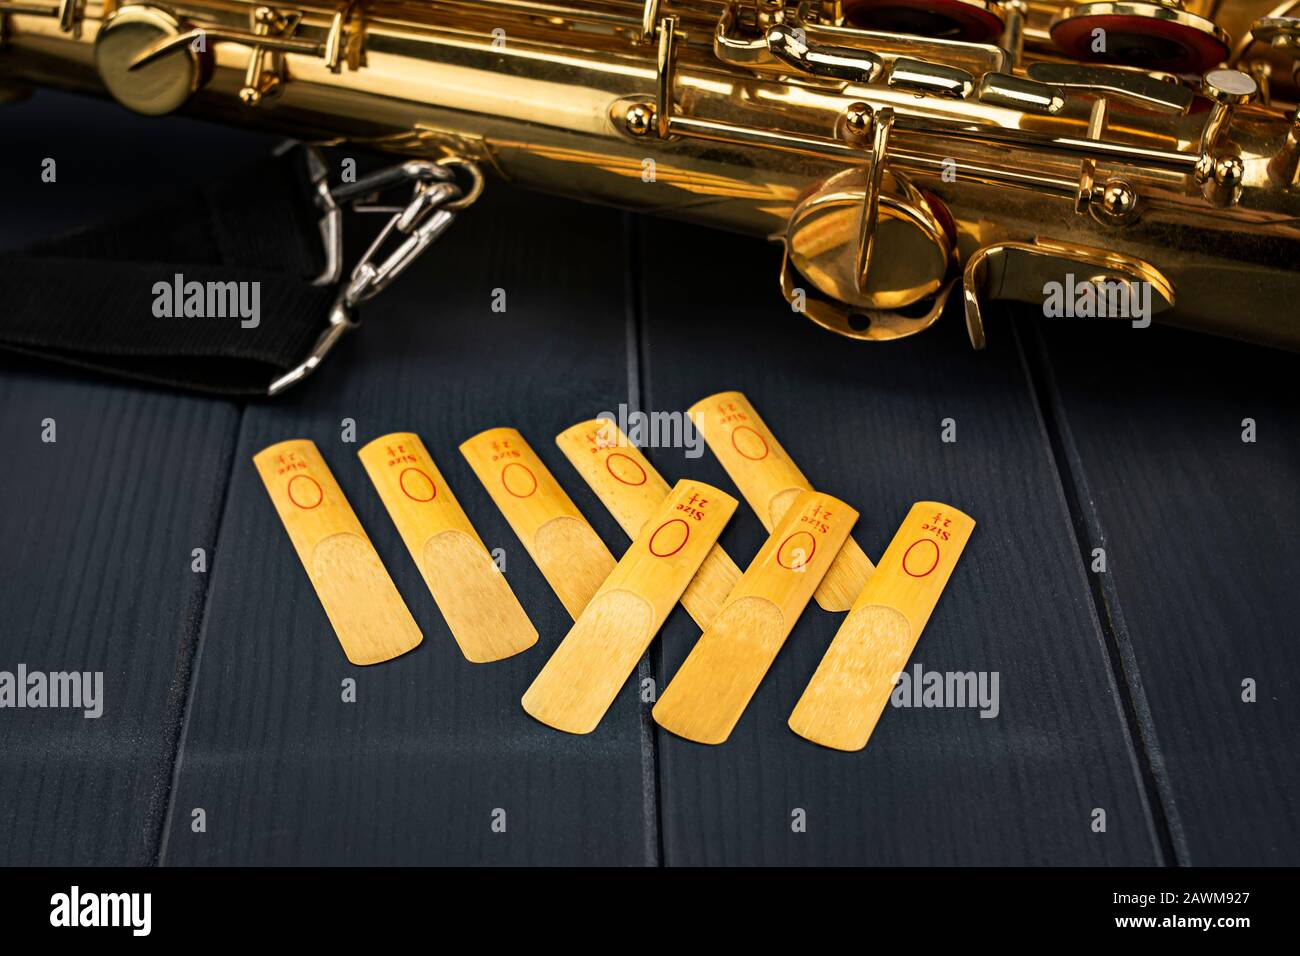 Reeds of the mouthpiece of a sax next to the golden and shiny instrument Stock Photo